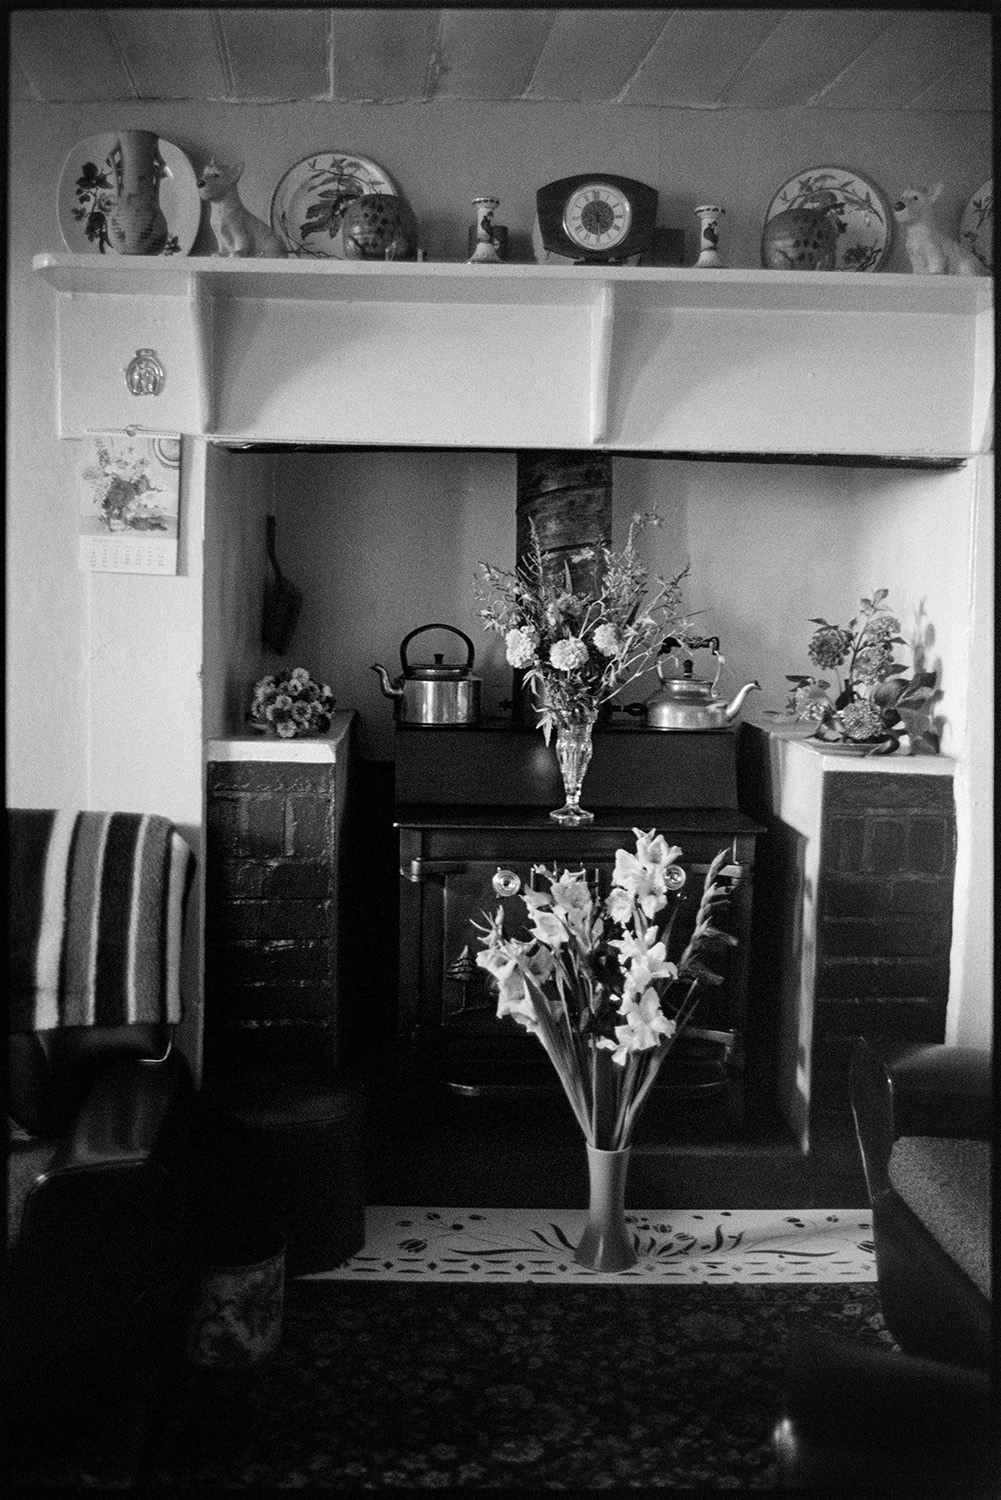 Vases  and displays of flowers by a fireplace in a house at Upcott, Dolton. Two kettles are also displayed on the fire. China plates and ornaments are on display on the mantelpiece above the fireplace.]